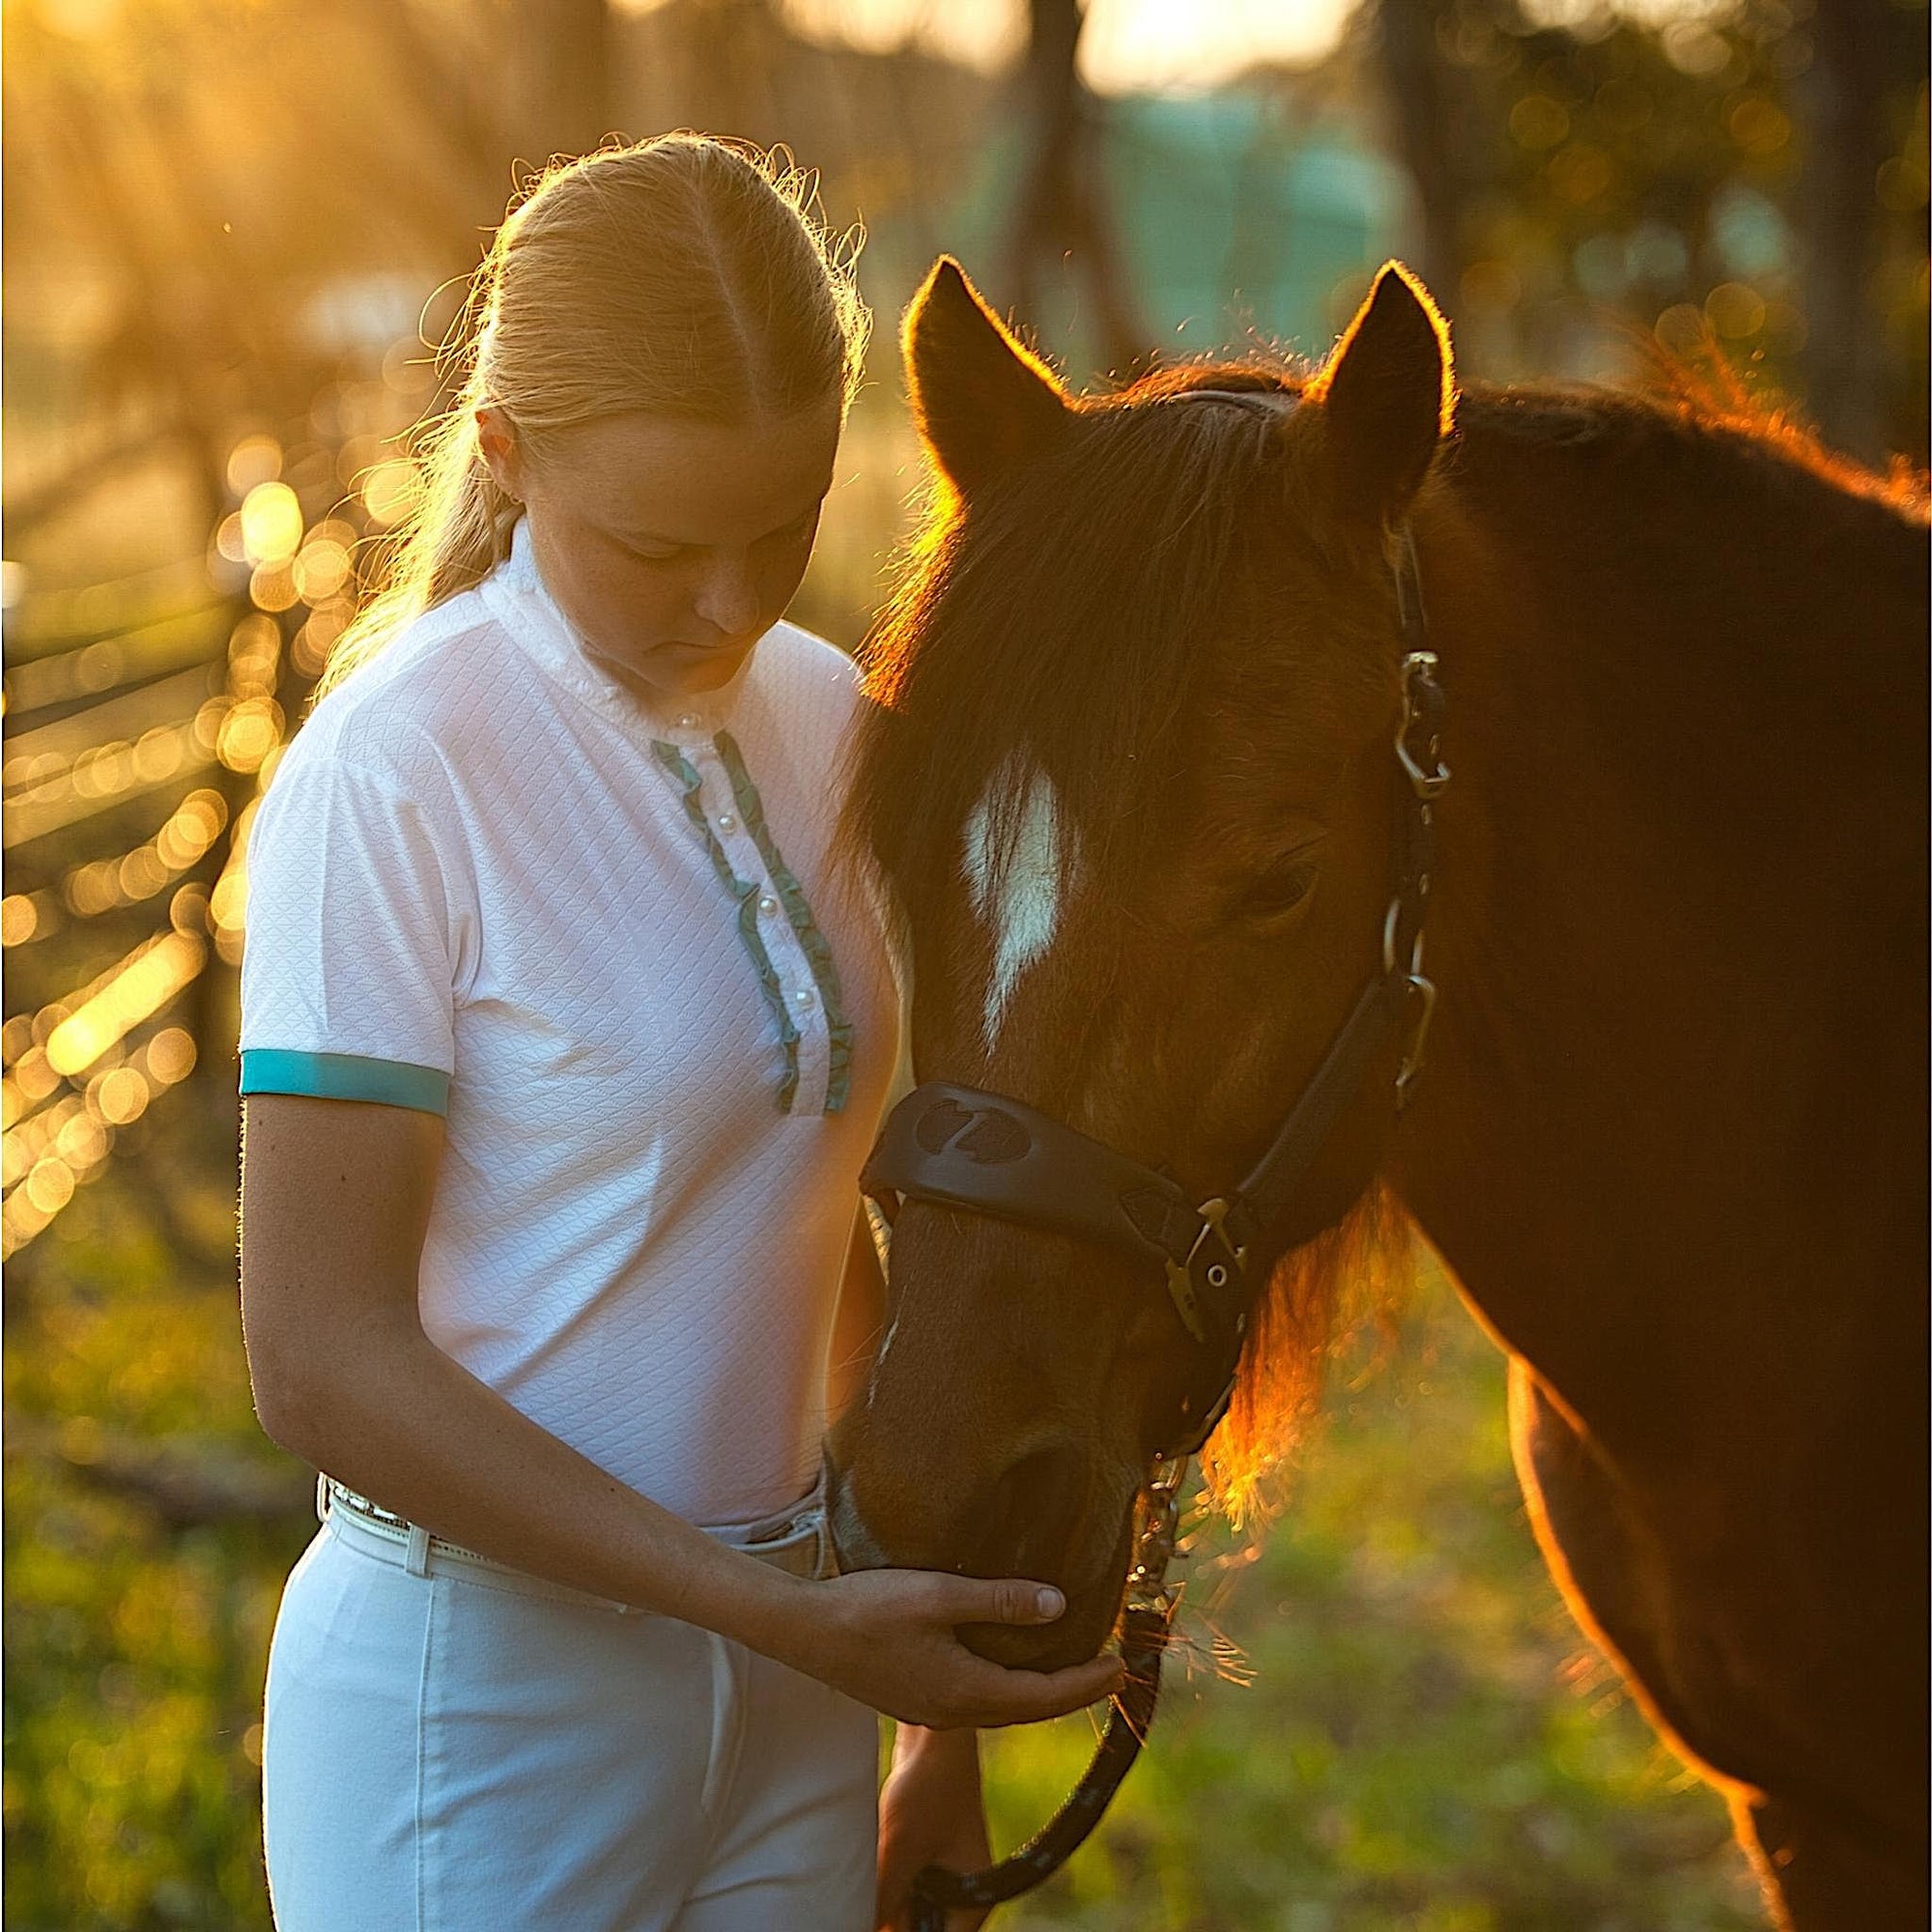 Lady holding a bay horse, wearing white show shirt with turquoise details.